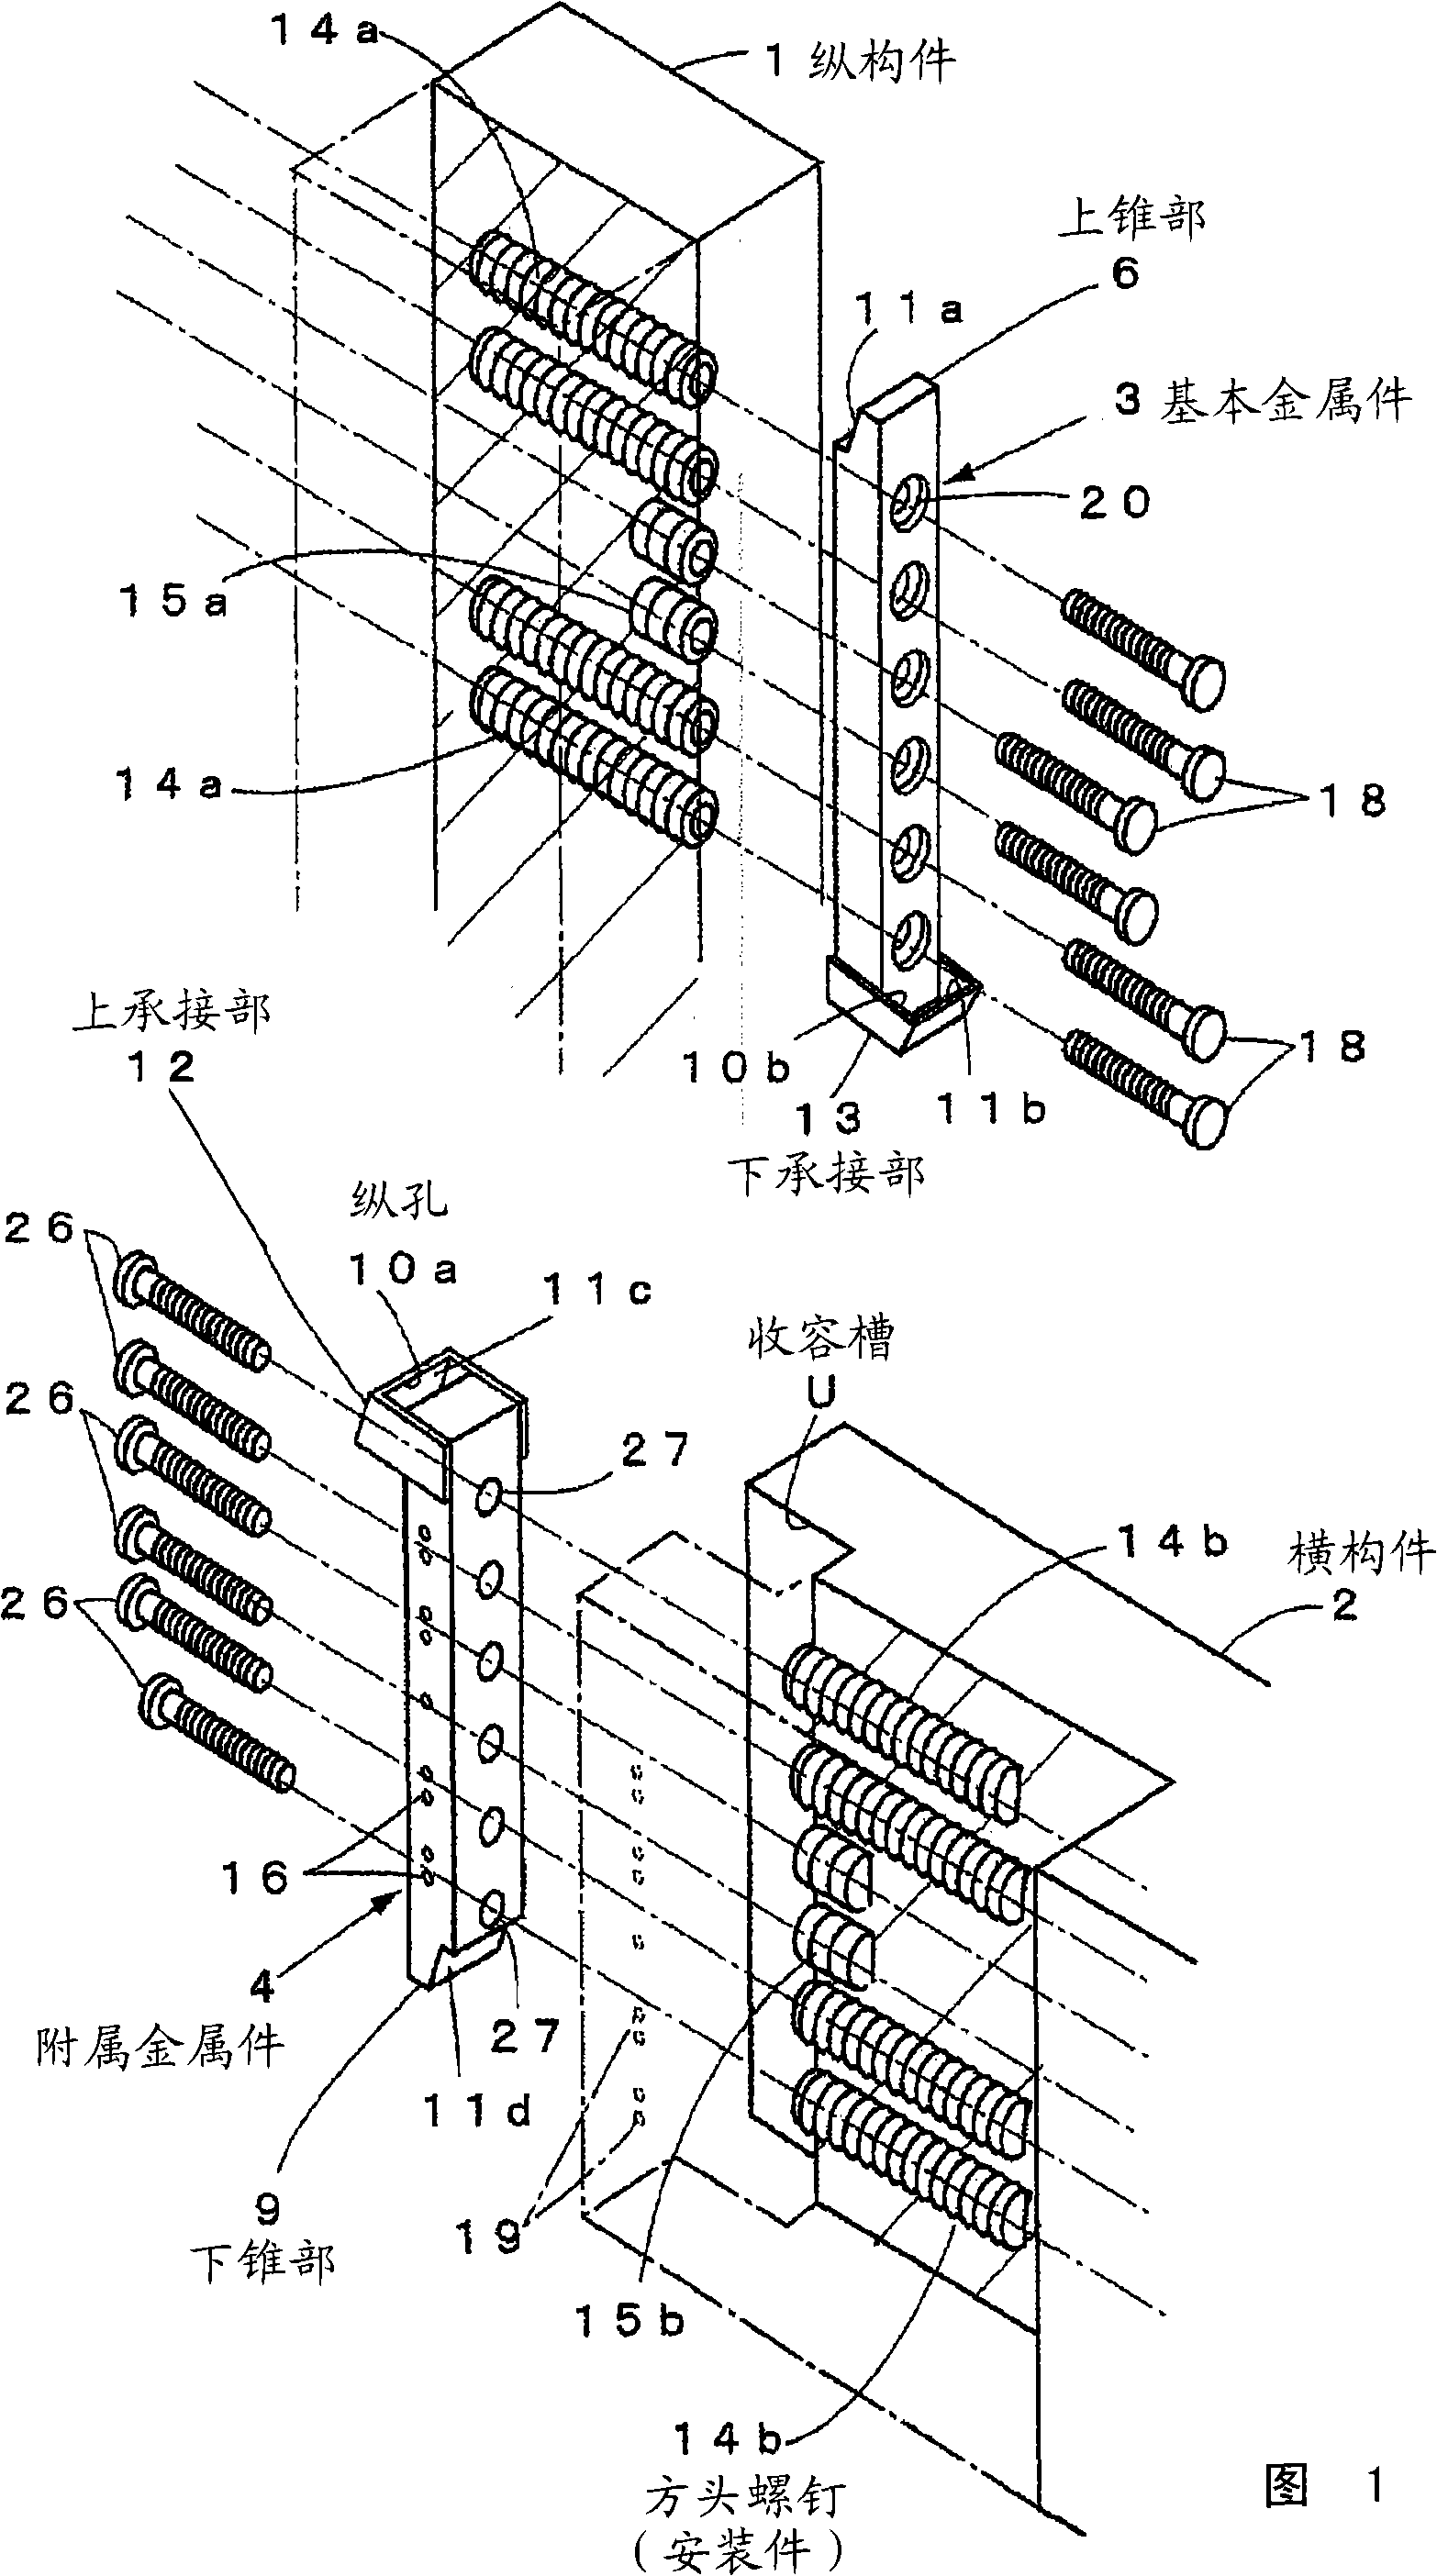 Connection hardware for wooden building